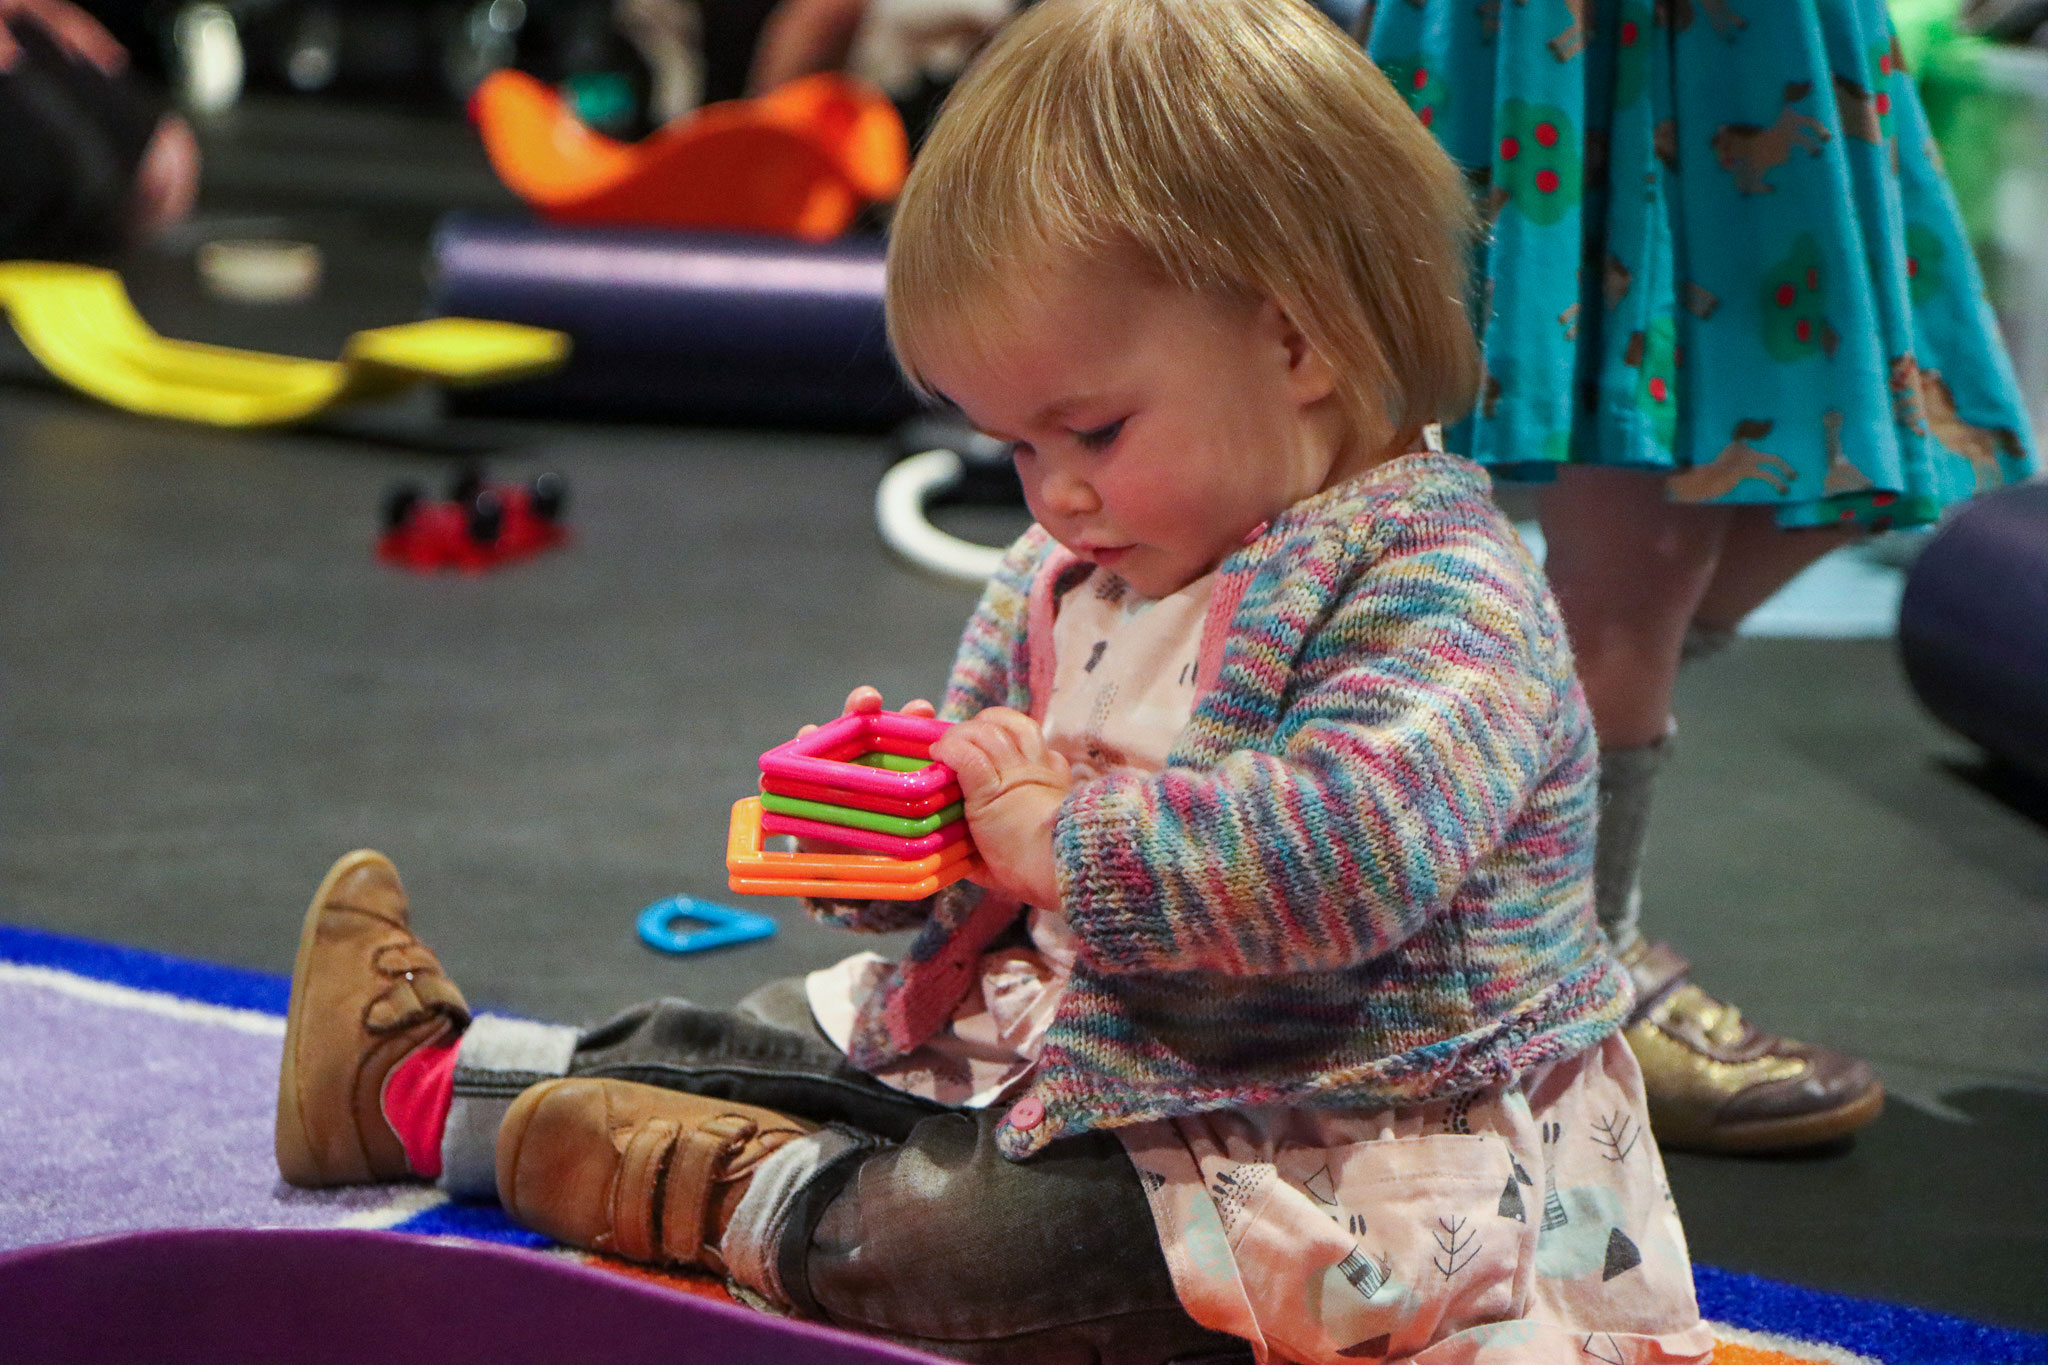 A girl sitting on a rug in Coventry Transport Museum, playing with a set of colourful plastic shapes